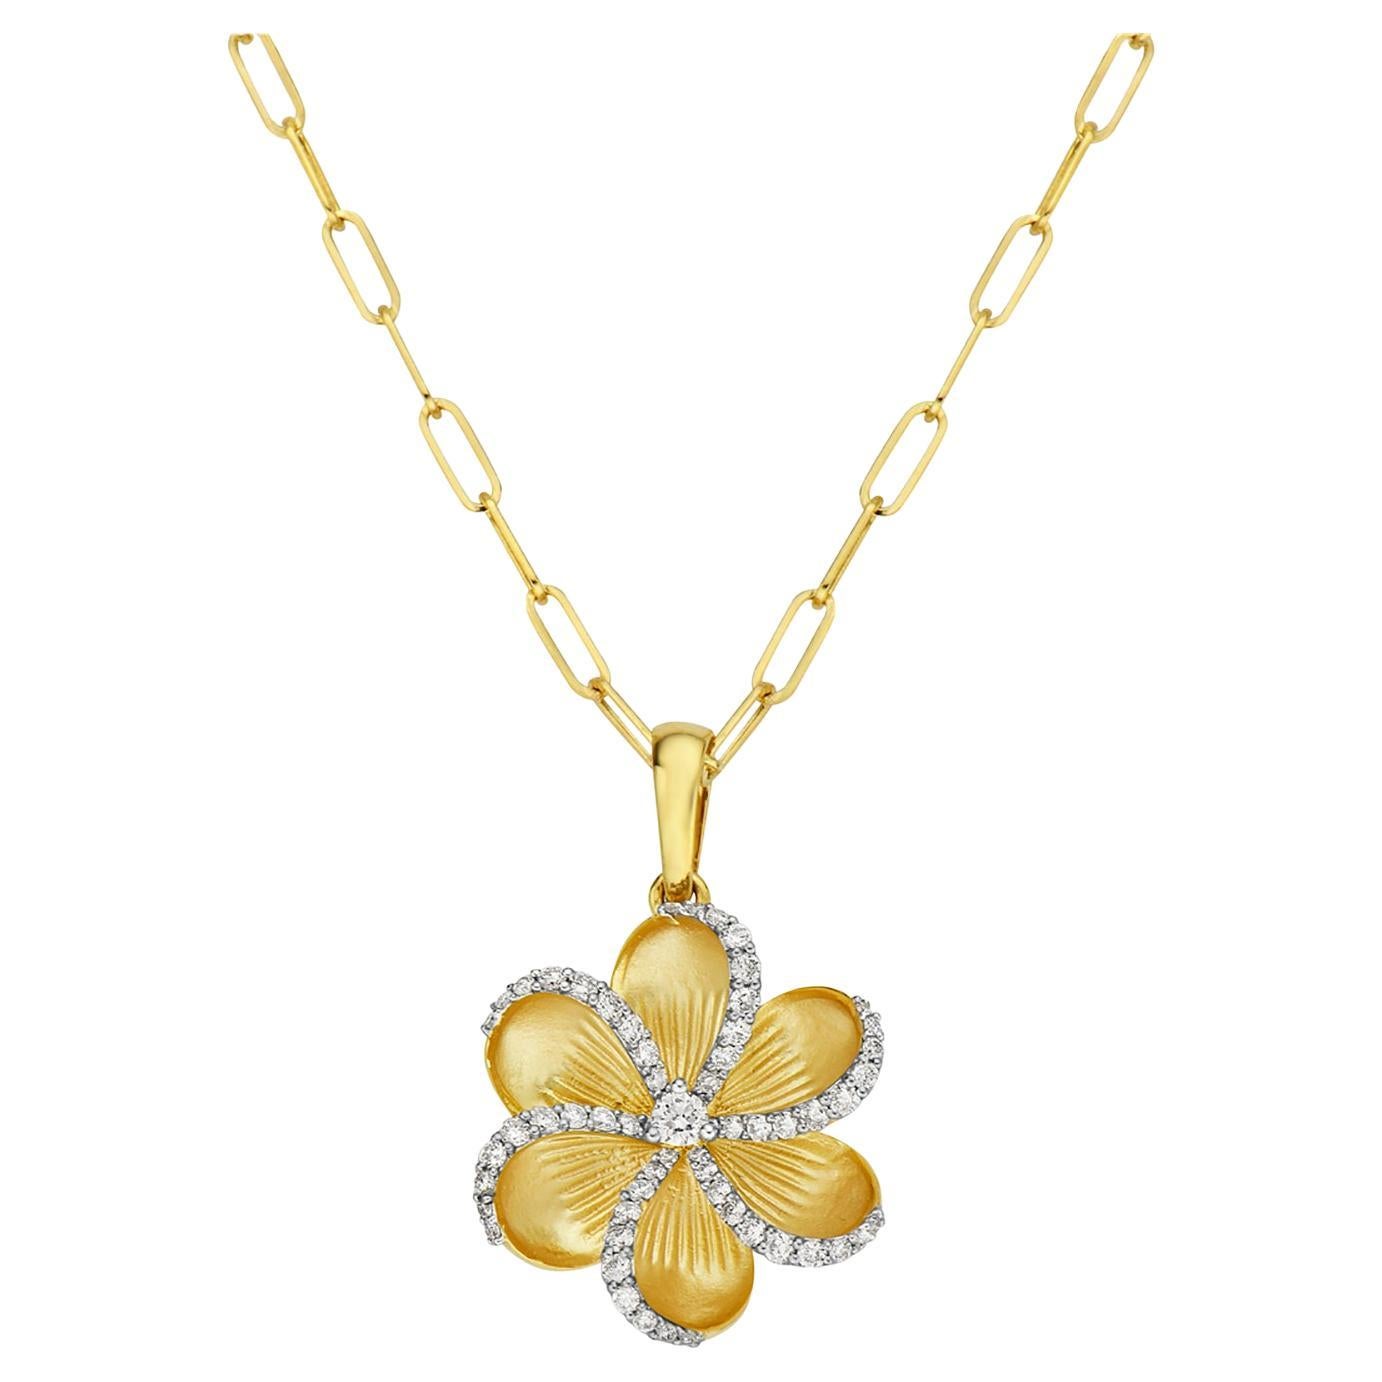 Carved Flowery Pendant with Pave Halo Diamonds on the Edge in 14k Yellow Gold